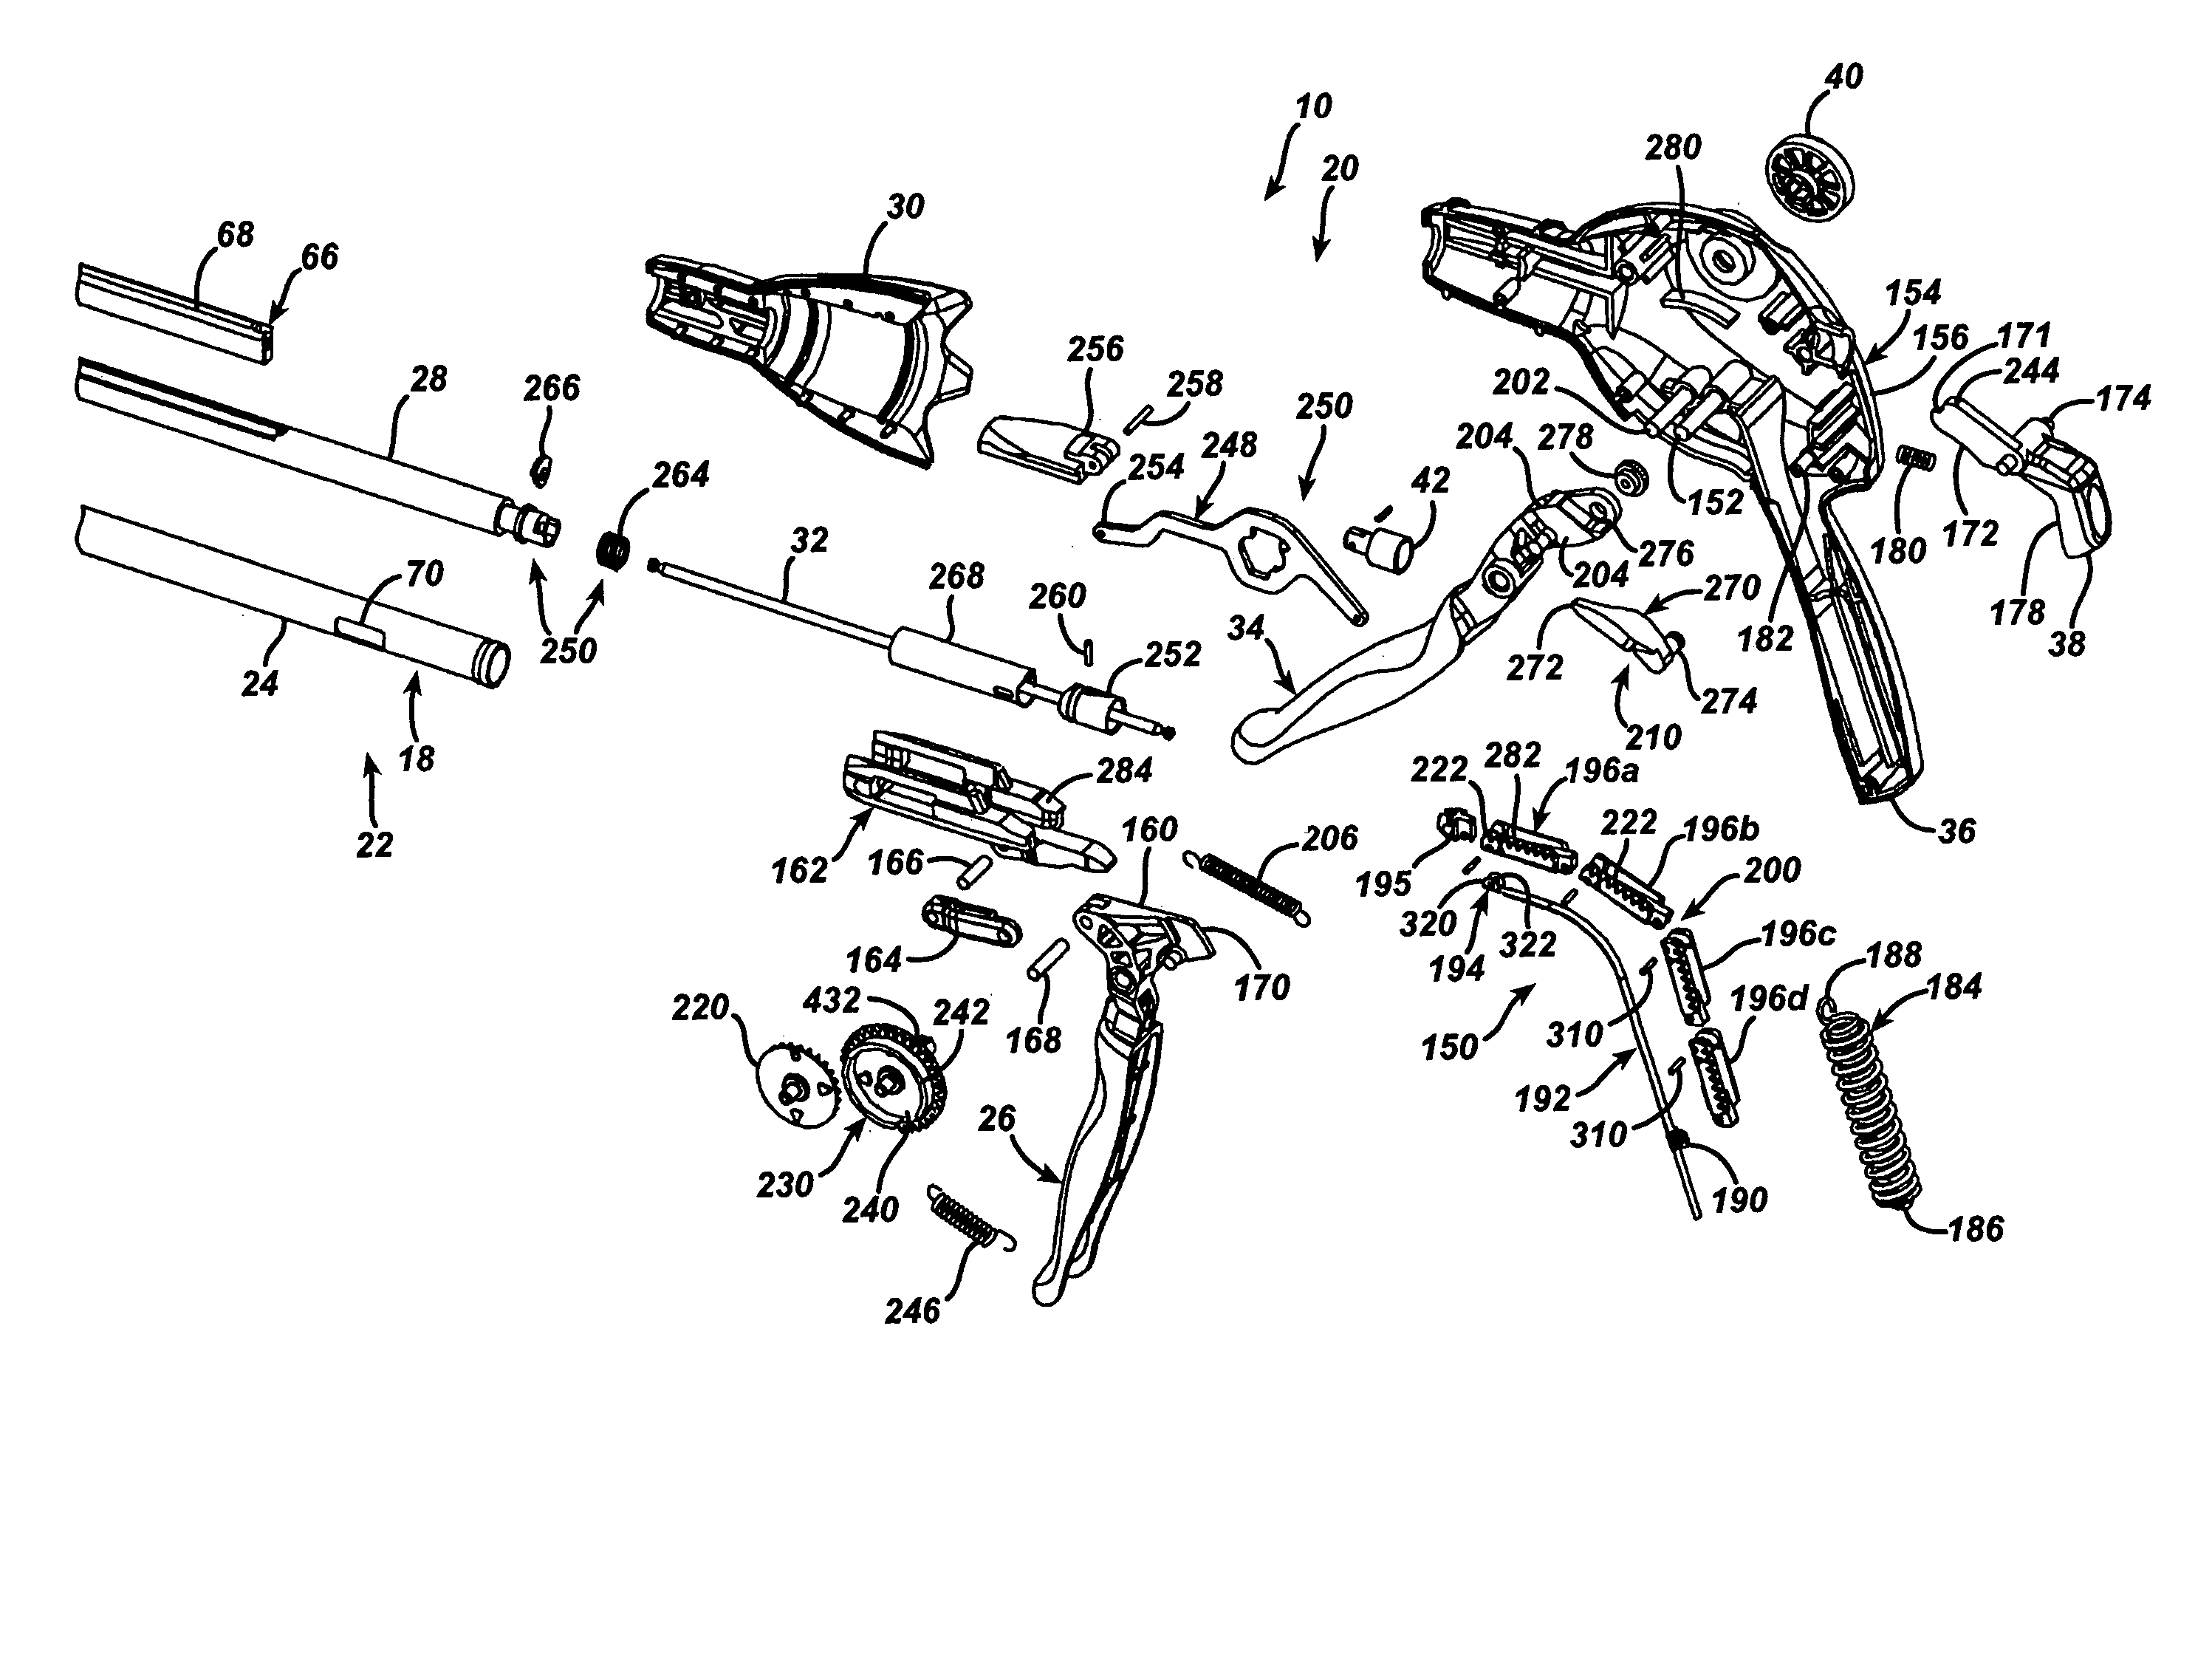 Surgical stapling instrument incorporating a multi-stroke firing mechanism with return spring rotary manual retraction system